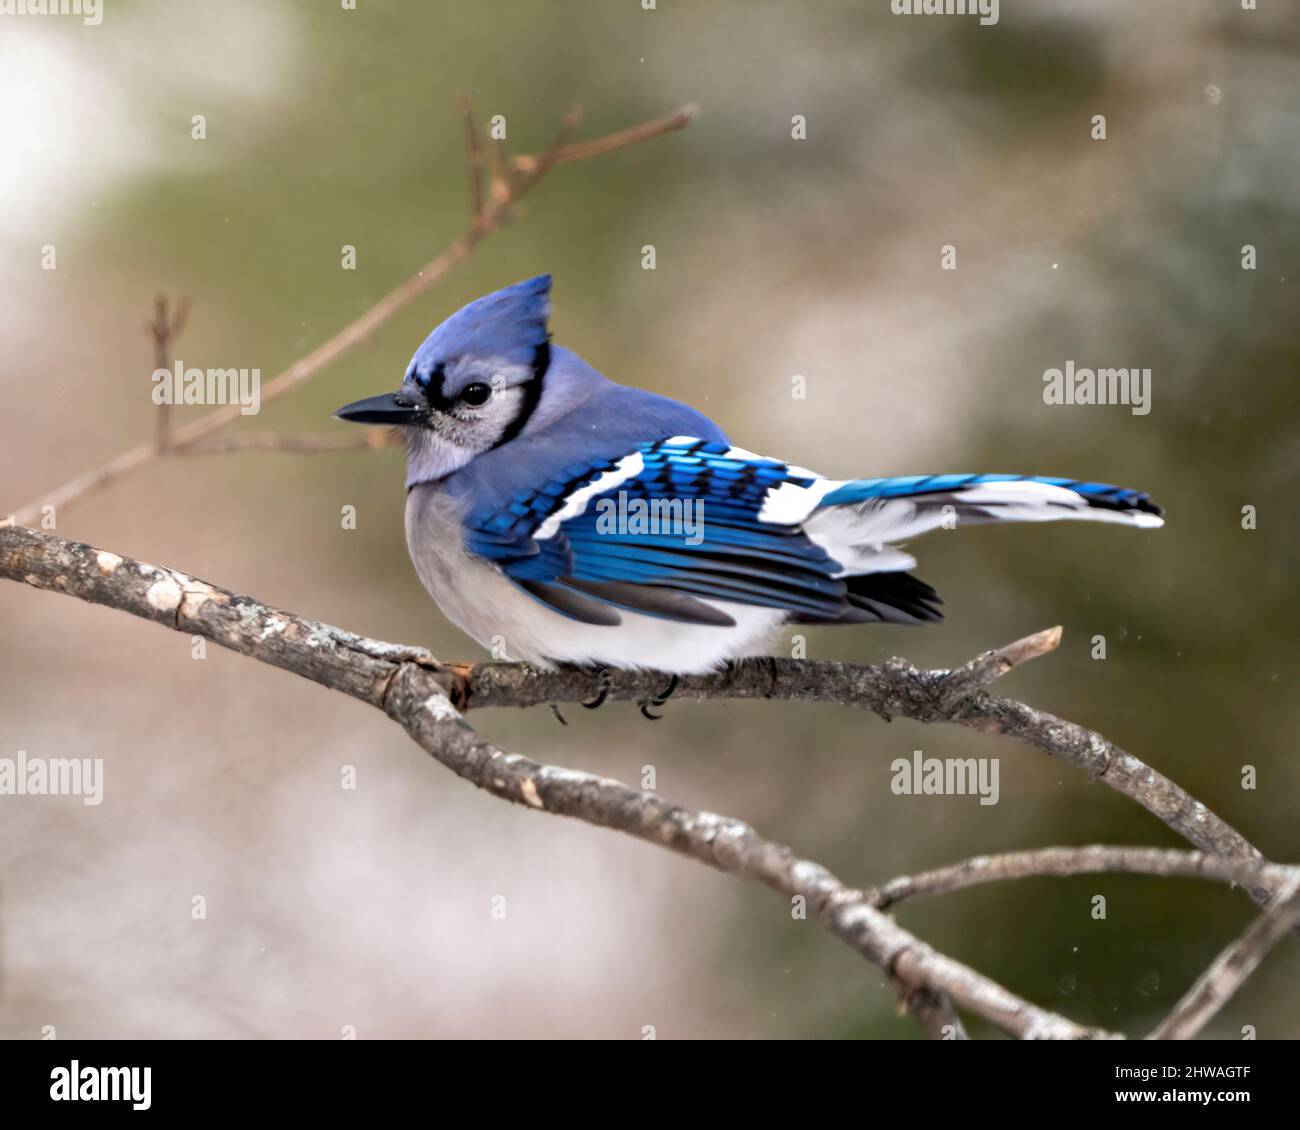 Blue Jay bird close-up perched on a branch with a blur forest background in  the winter season environment and habitat displaying blue feathers. Jay  Stock Photo - Alamy